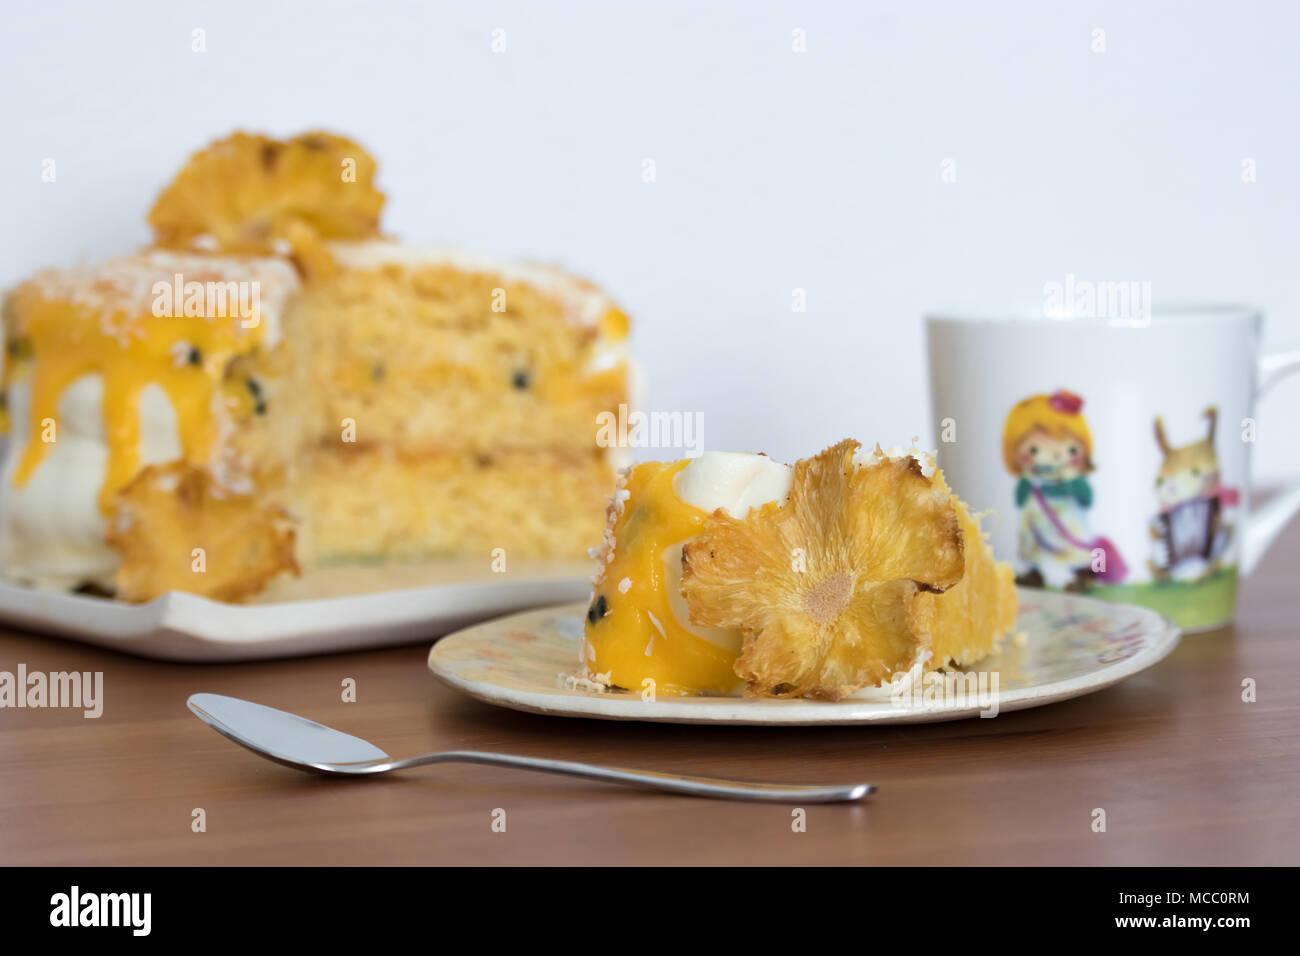 Afternoon tea. A slice of pineapple and coconut layer cake with passion fruit curd. Served on handmade plates. Stock Photo